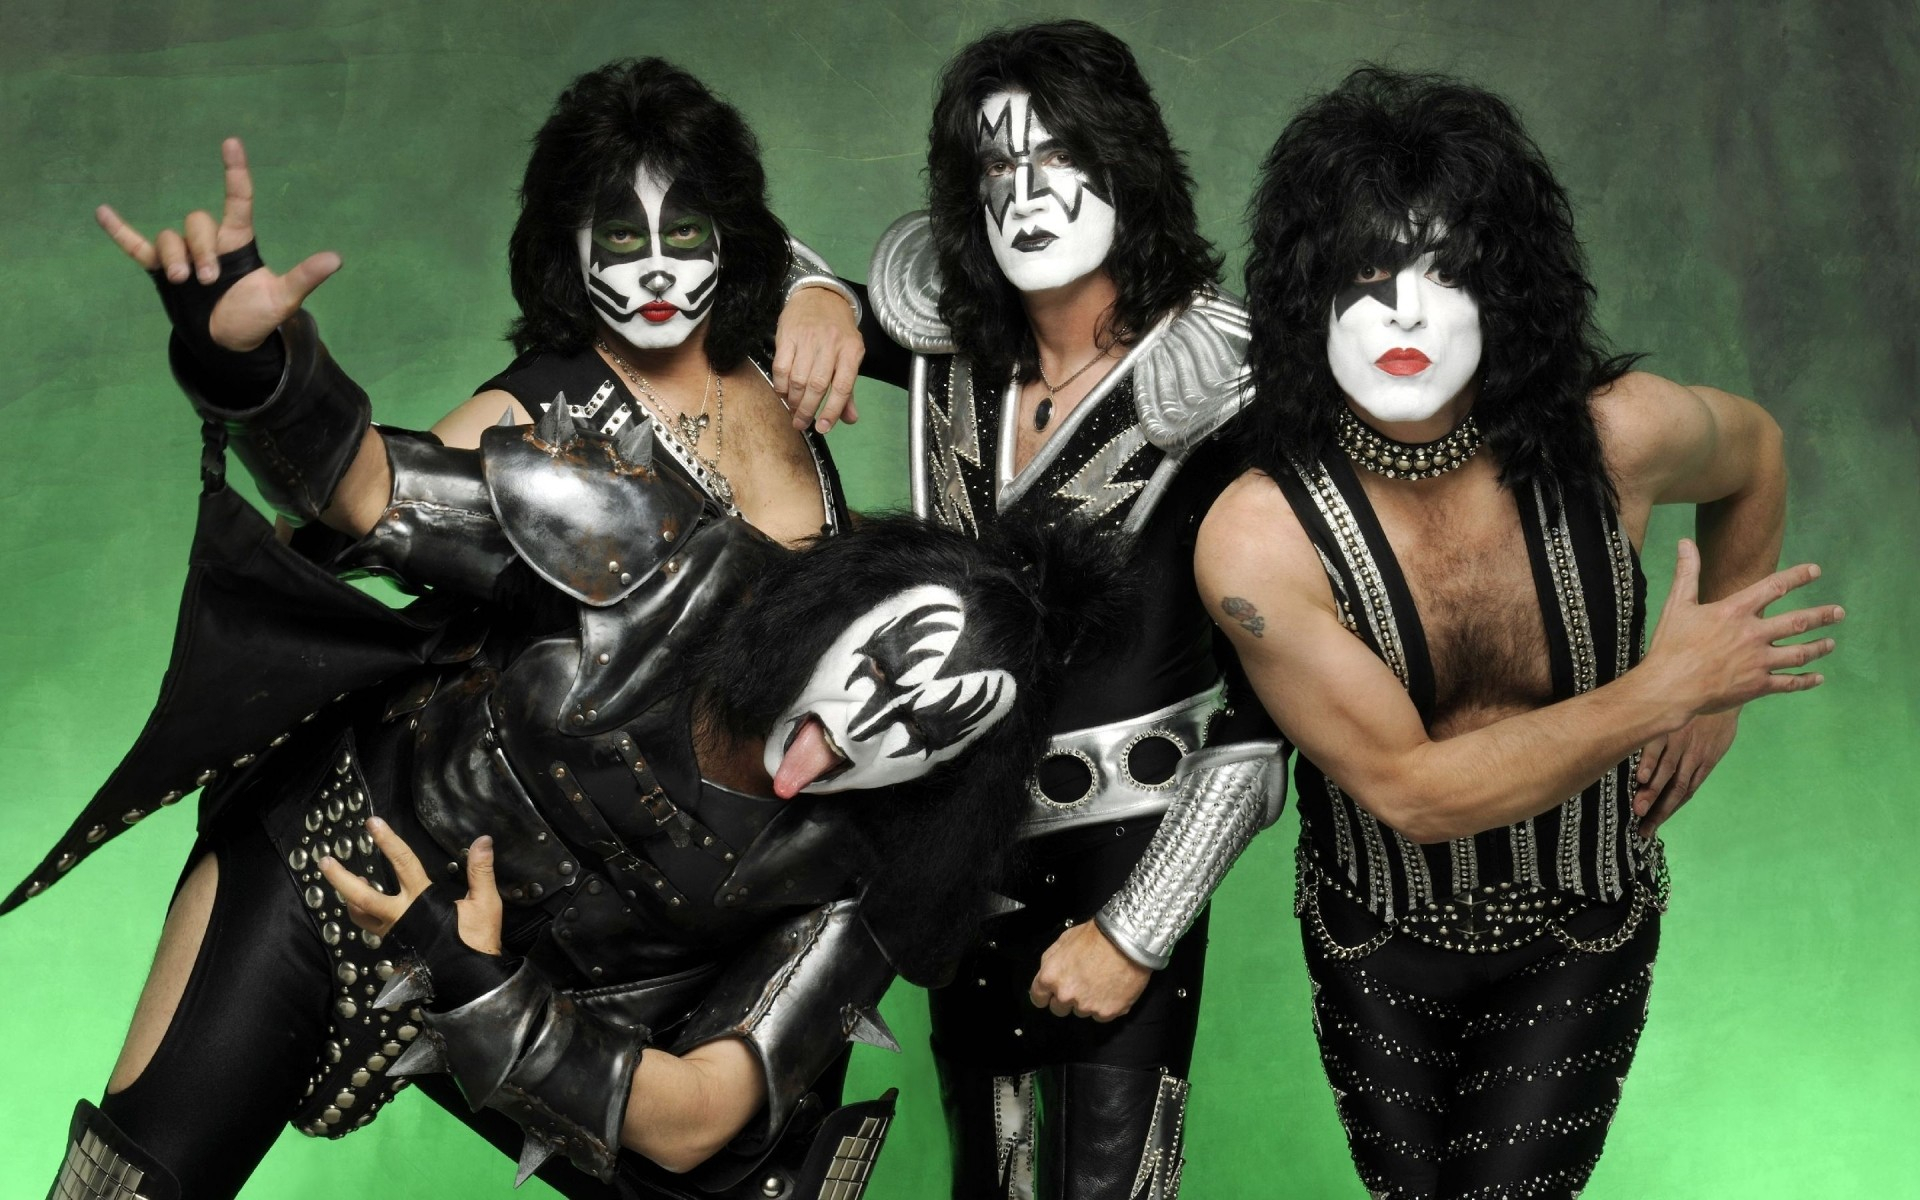 1920x1200 Rock band Kiss on a green background phone background image